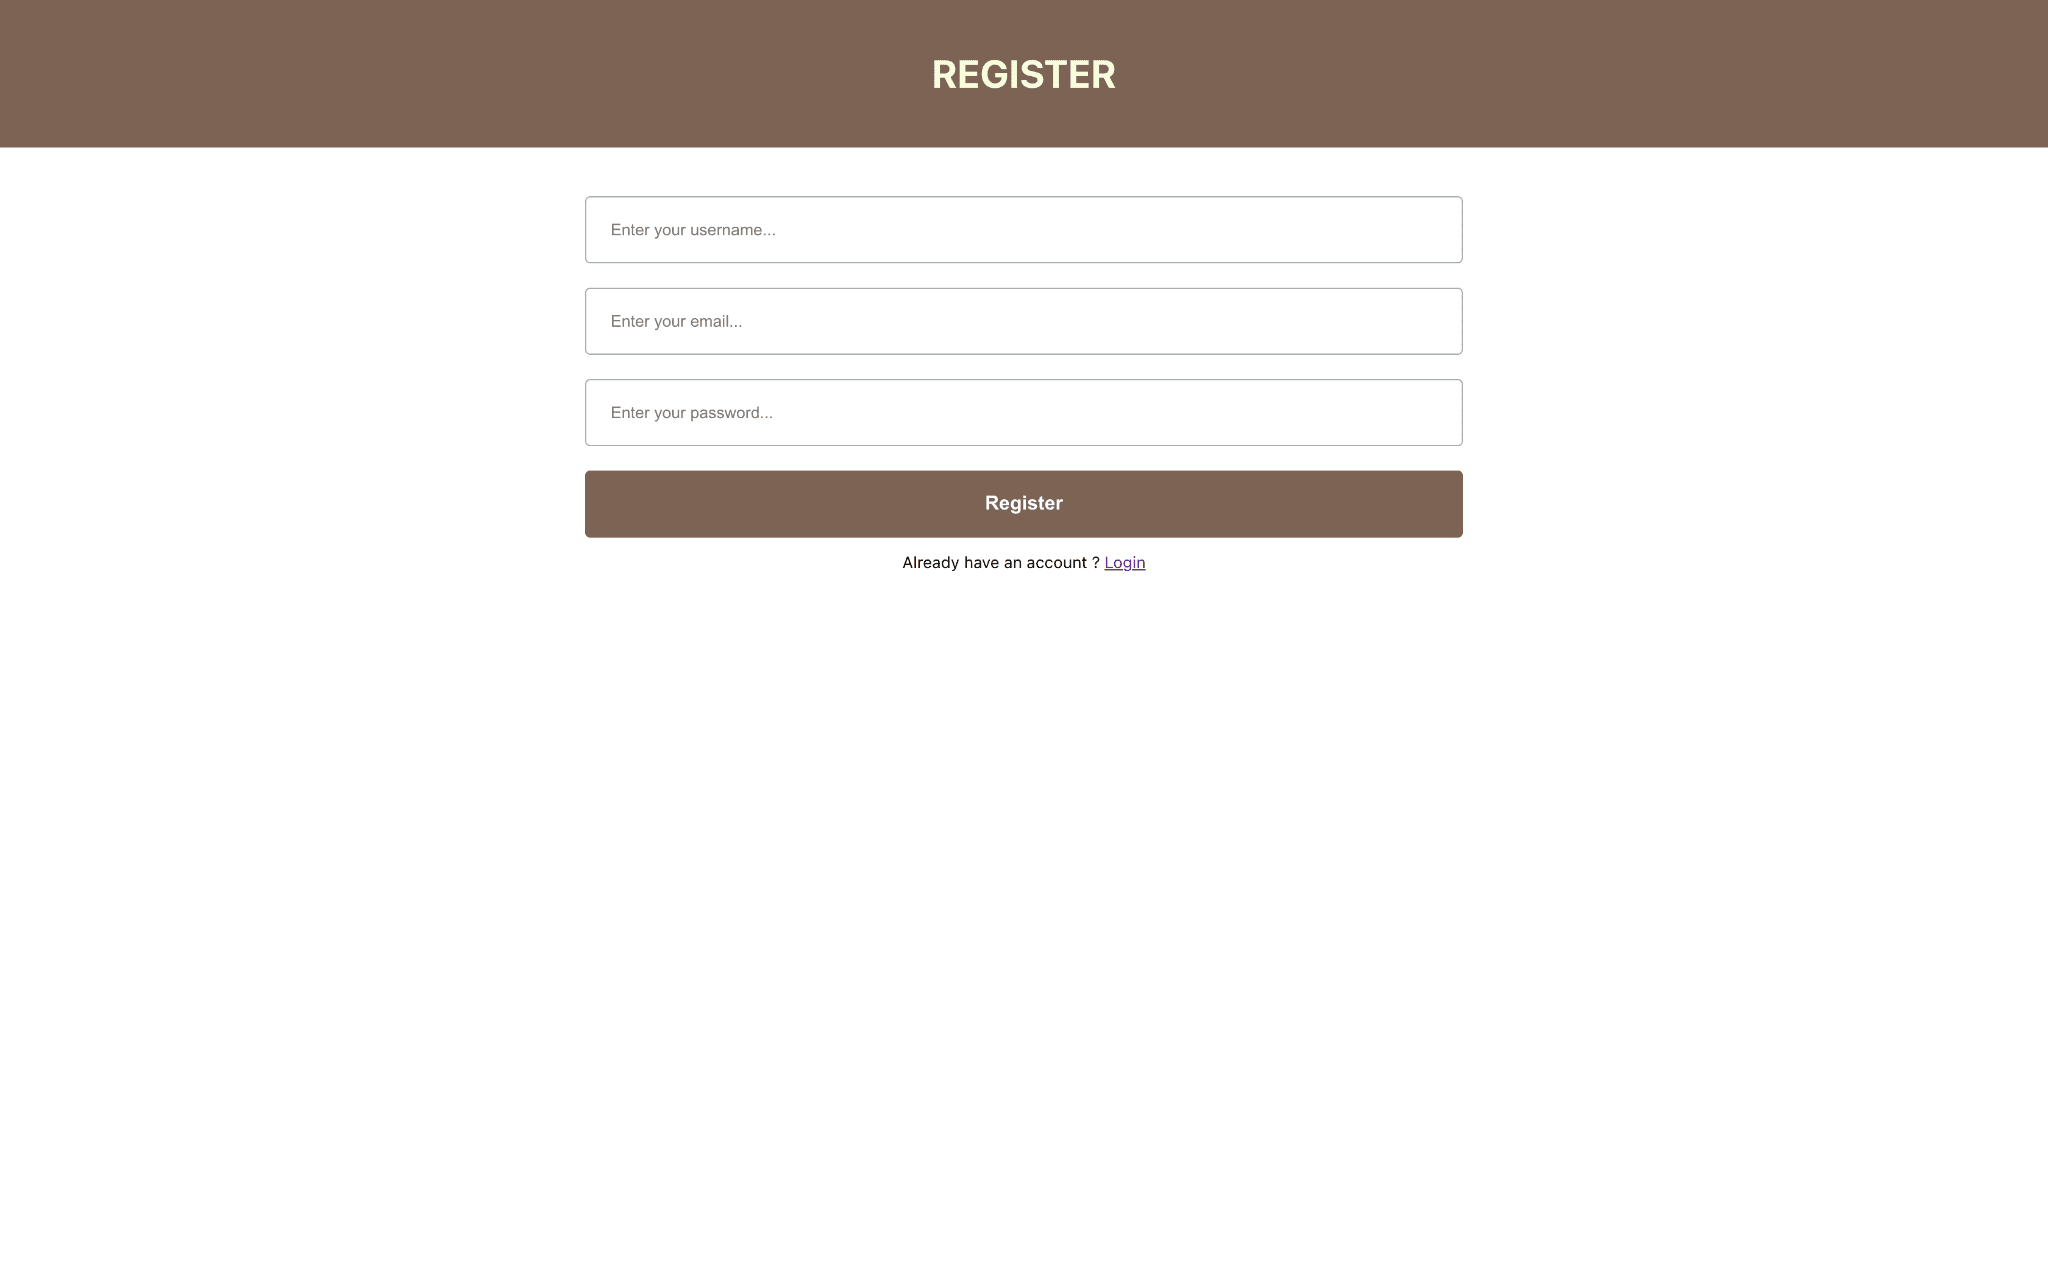 An image showing the registration page